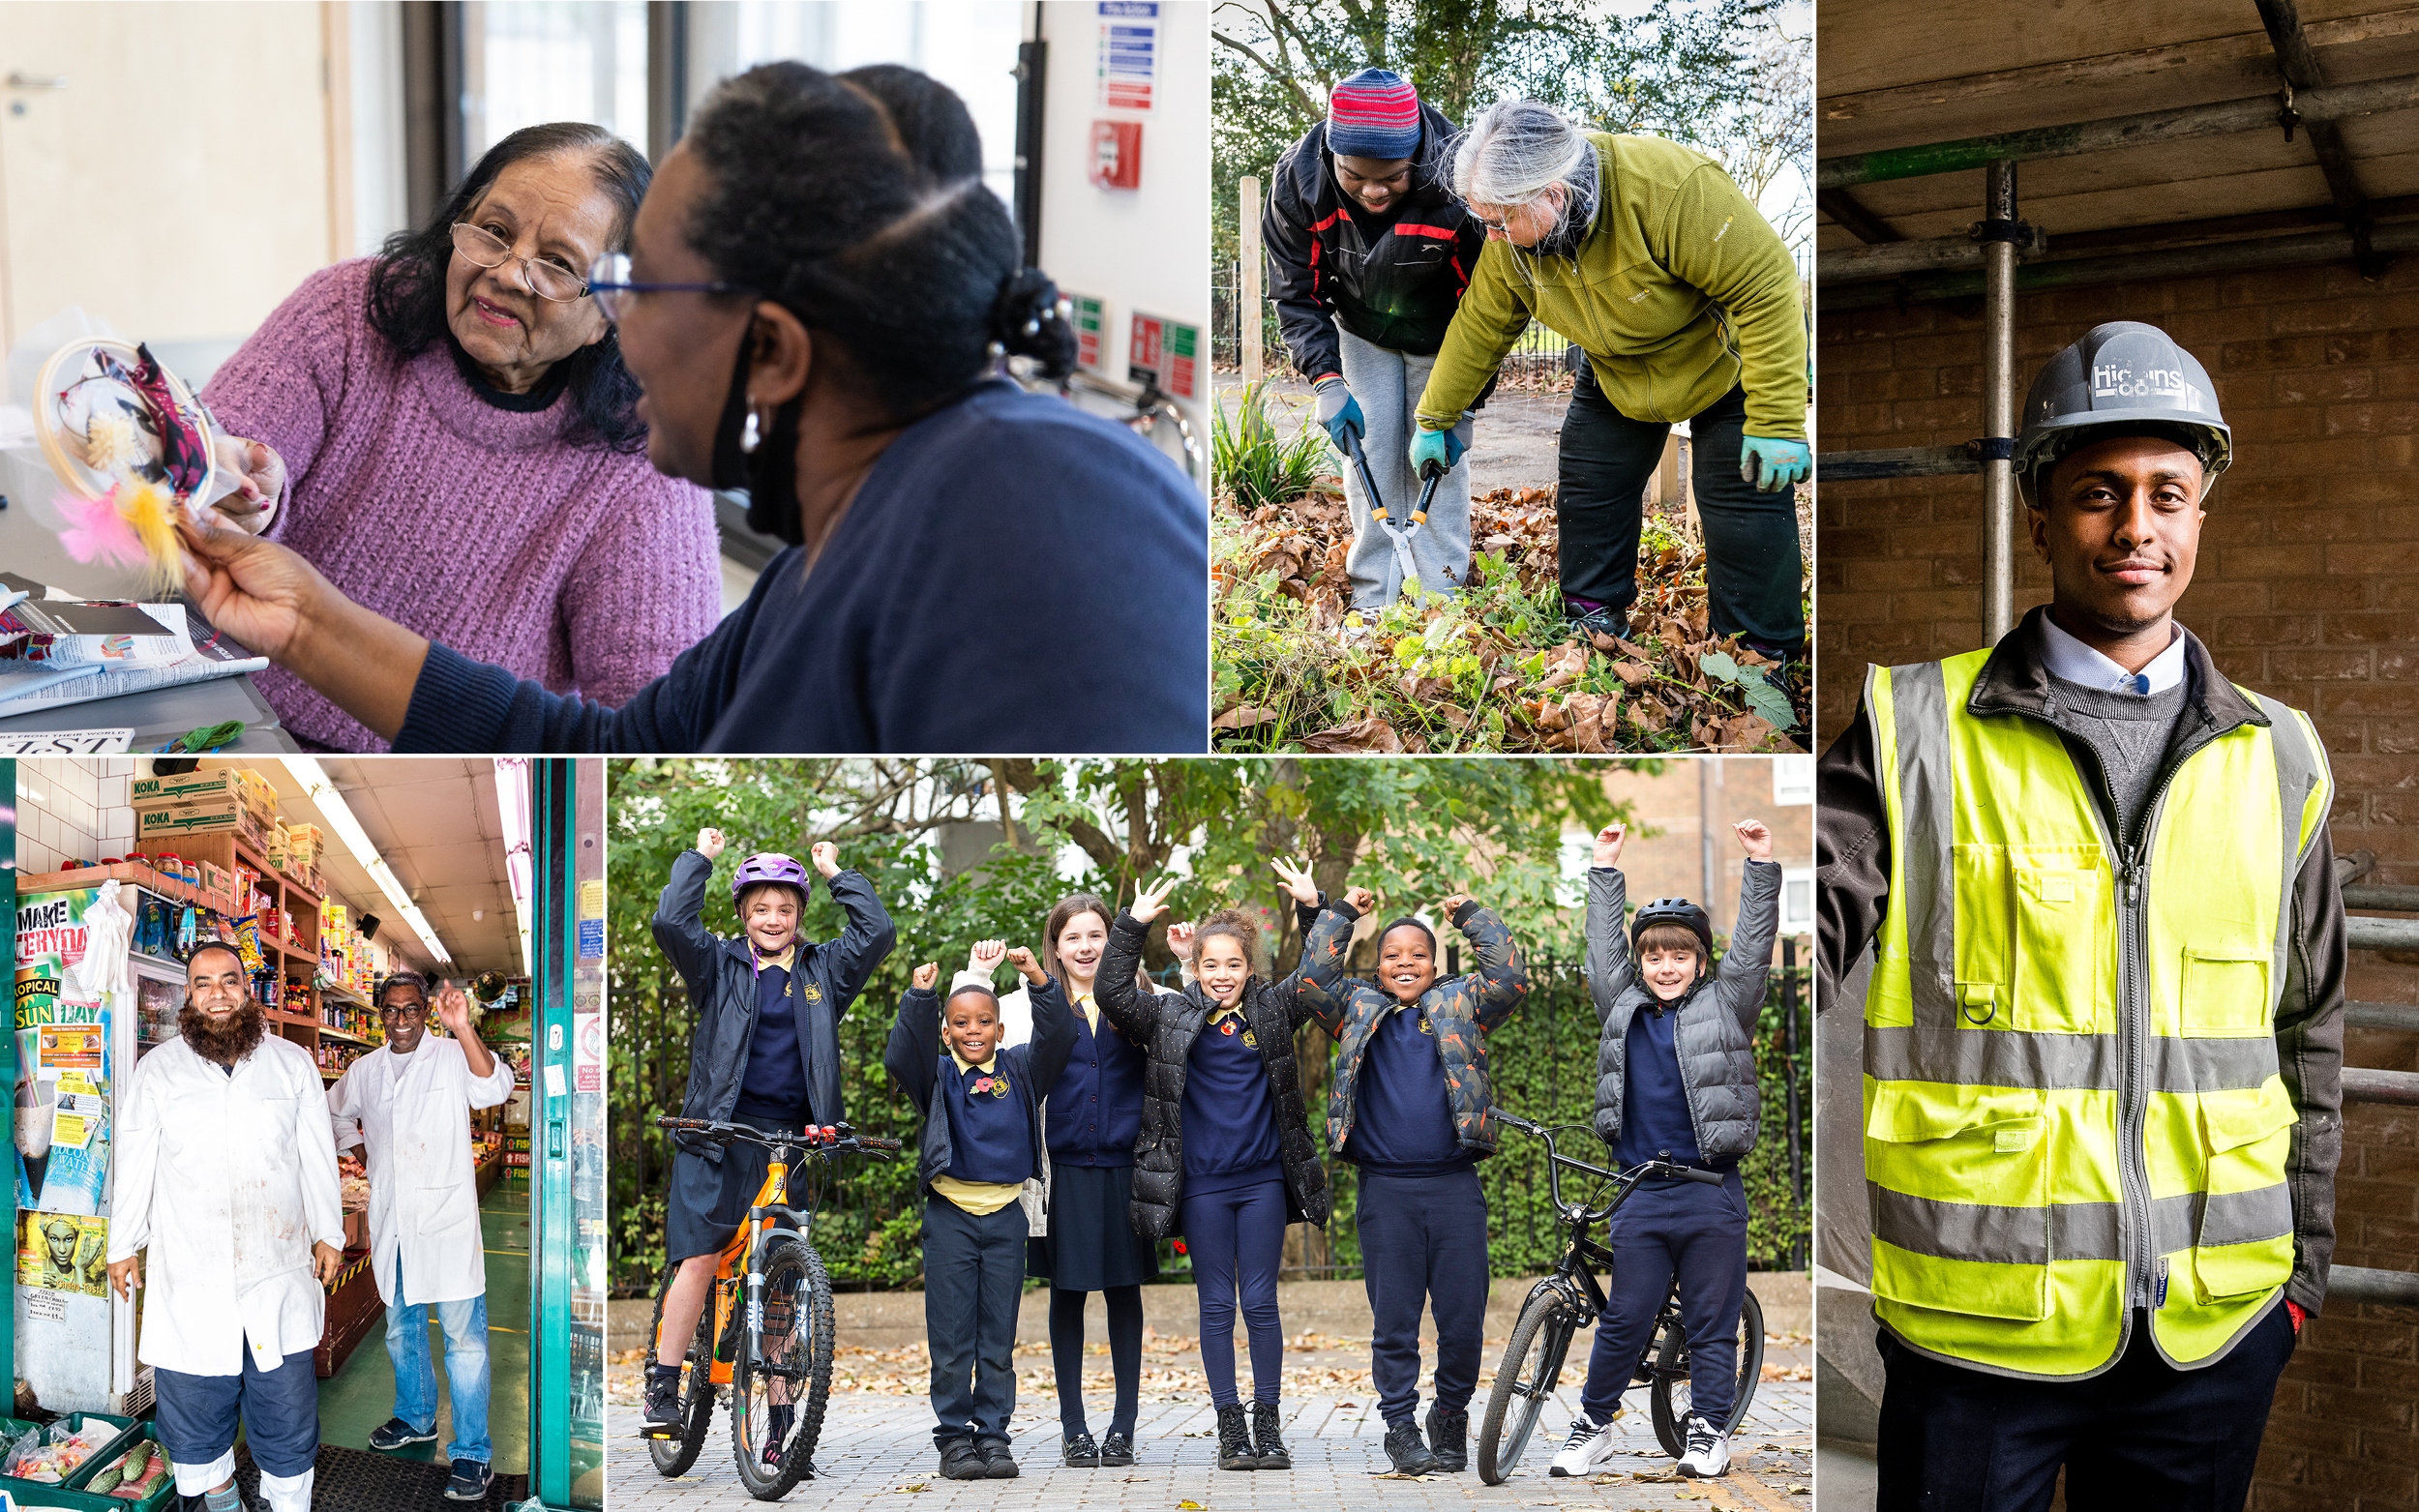 A collage of images showing the Islington community with children, community activities, local employees and businesses.